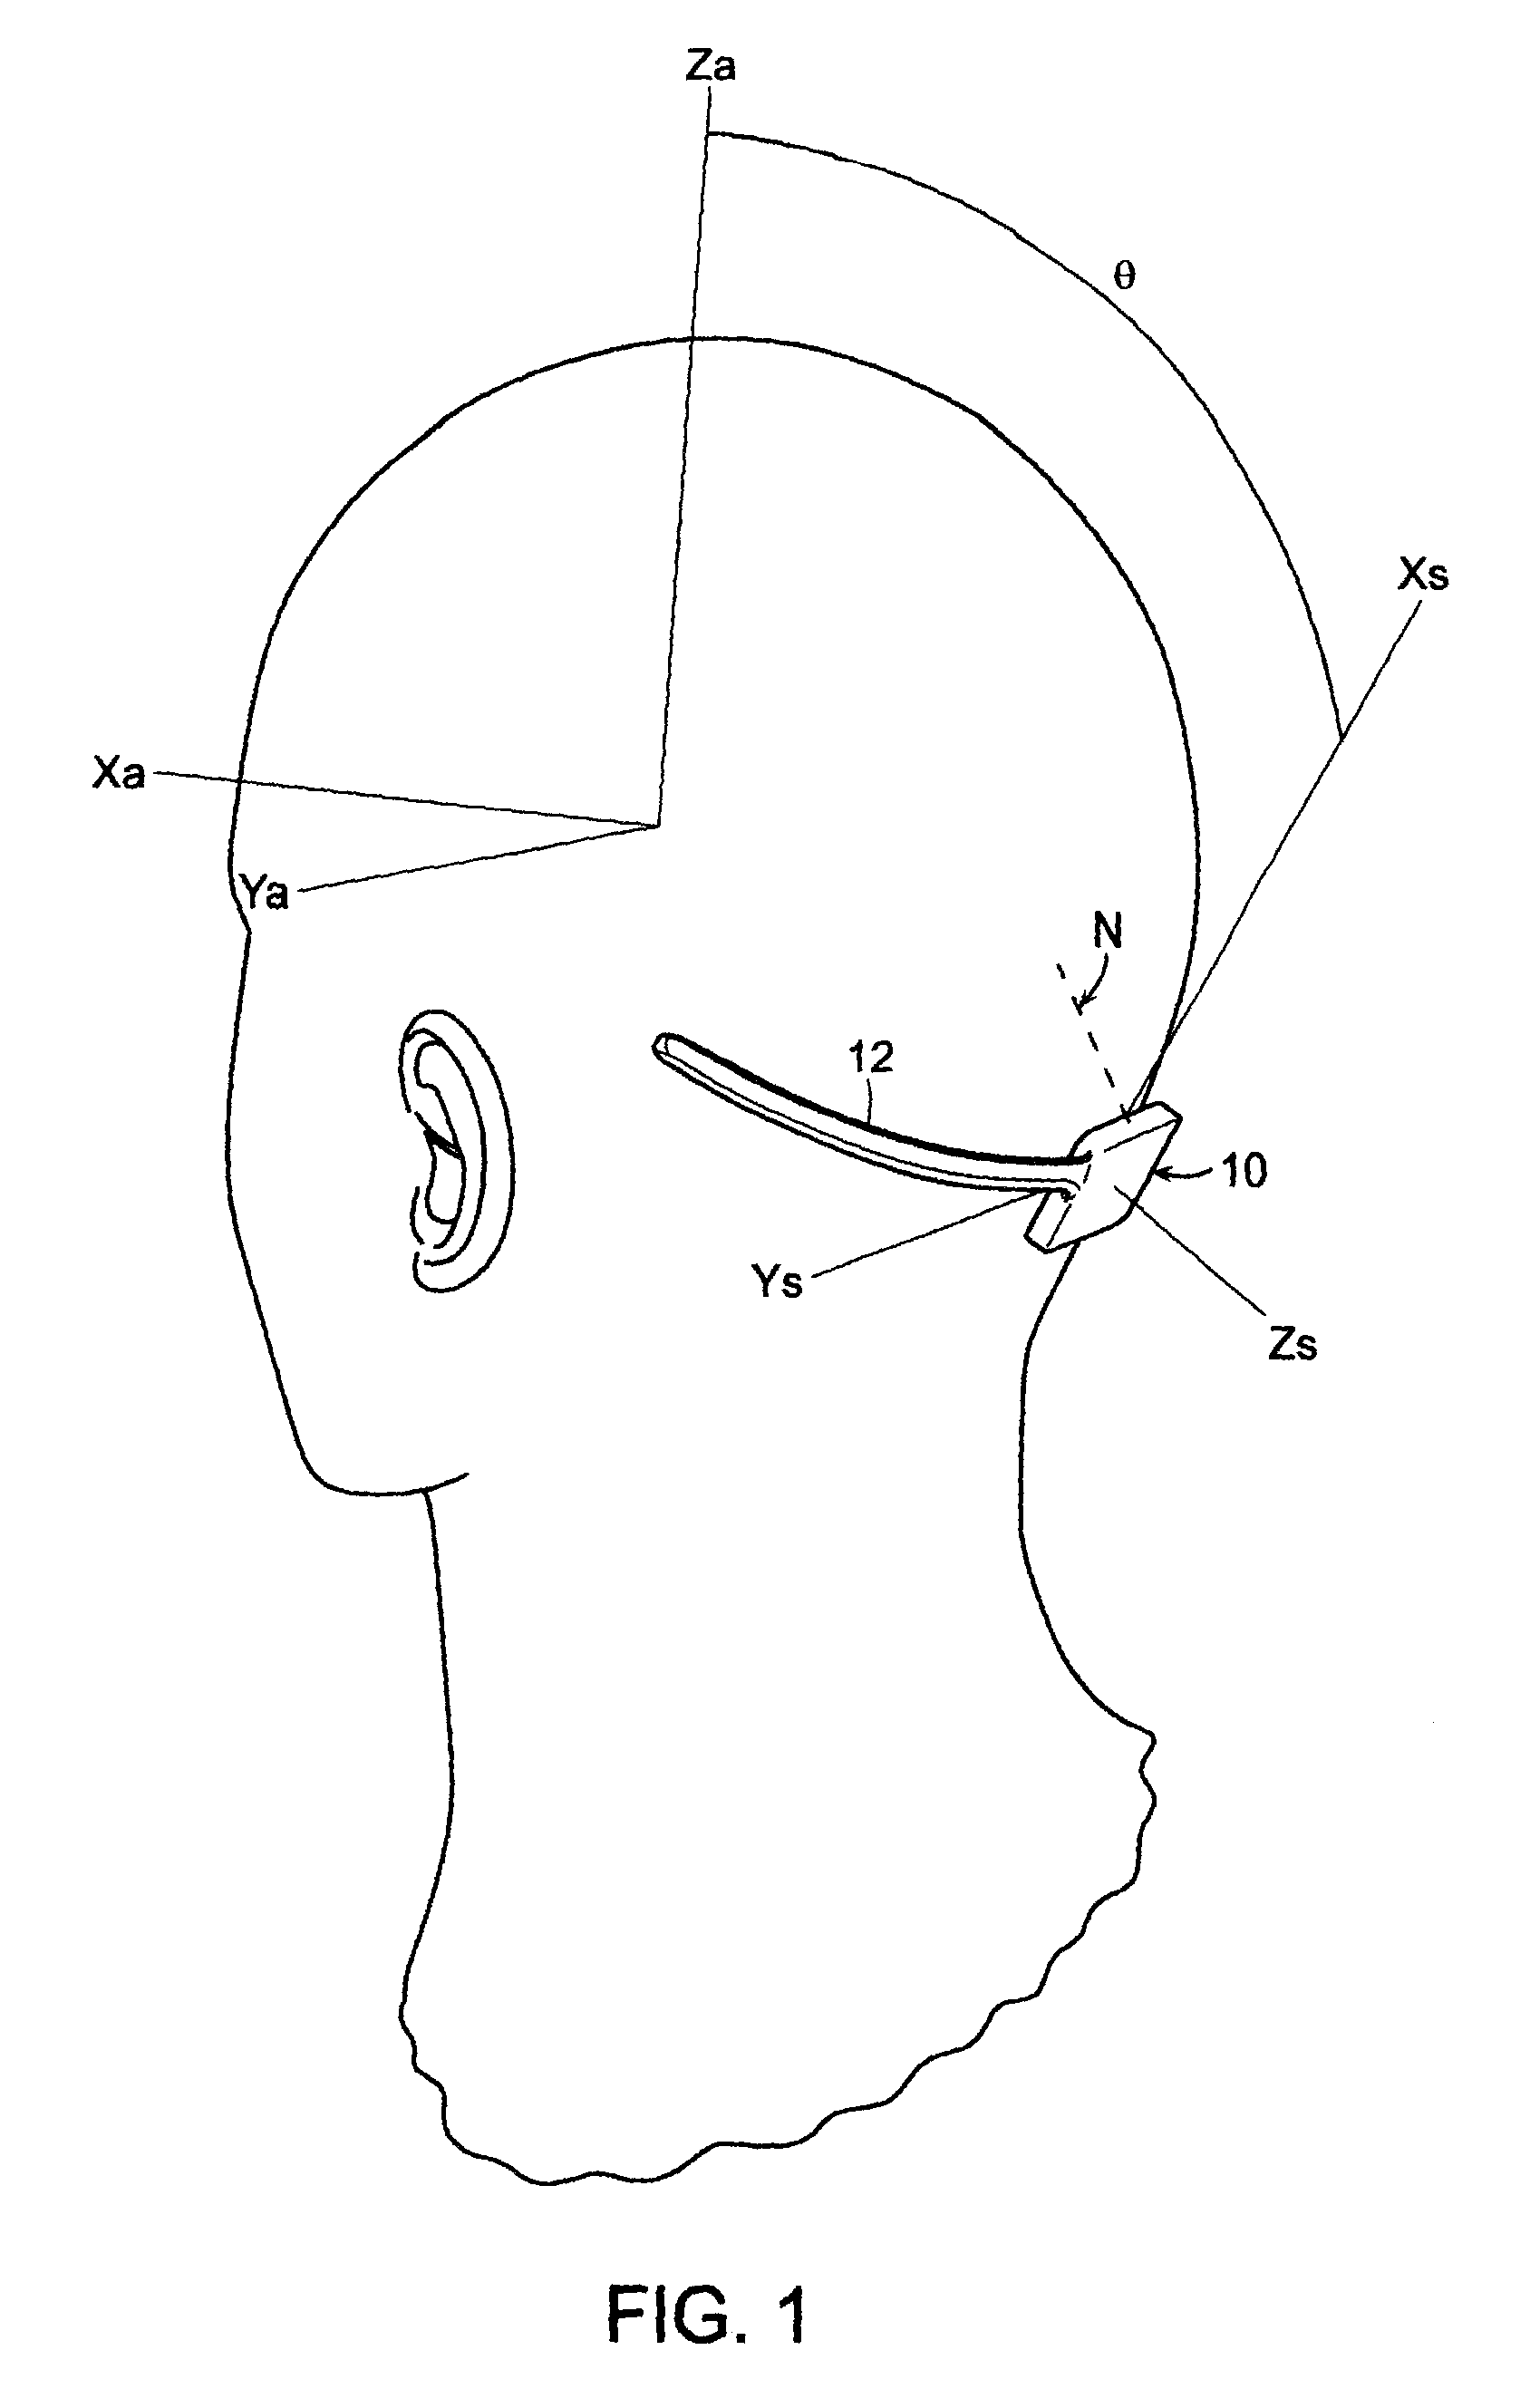 Sensor module for sensing forces to the head of an individual and wirelessly transmitting signals corresponding thereto for analysis, tracking and/or reporting the sensed forces